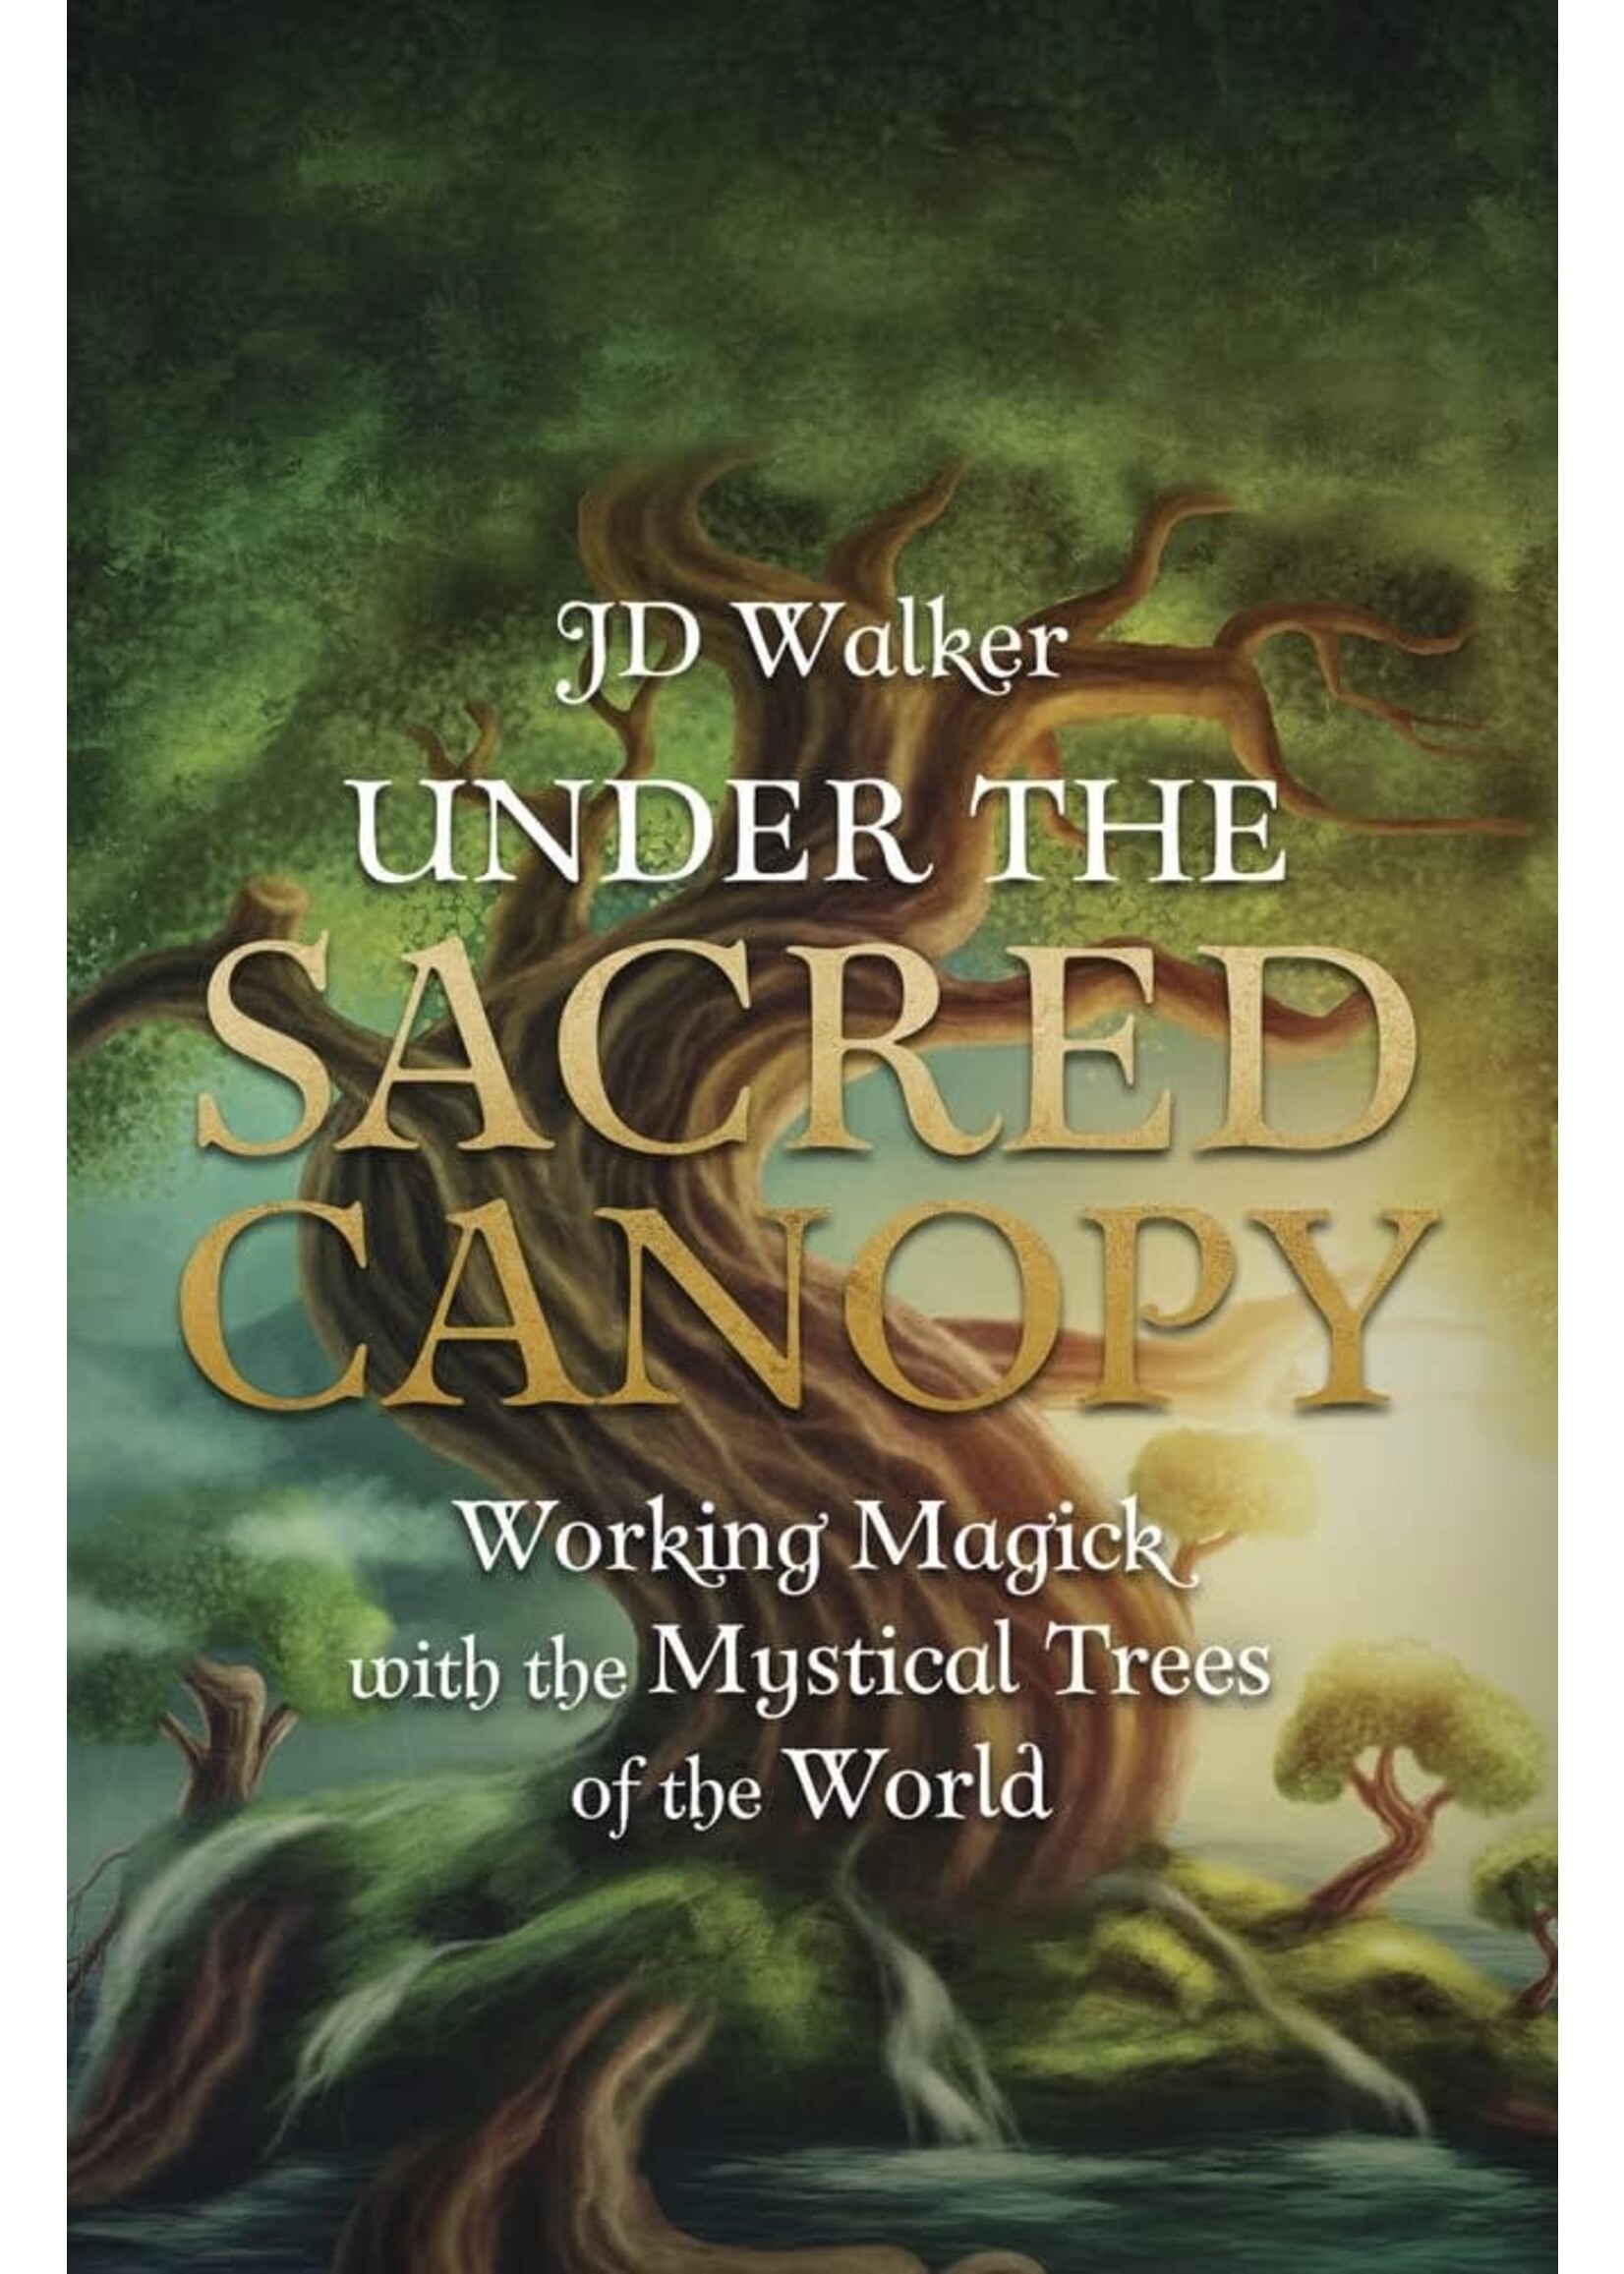 Under the Sacred Canopy by JD Walker